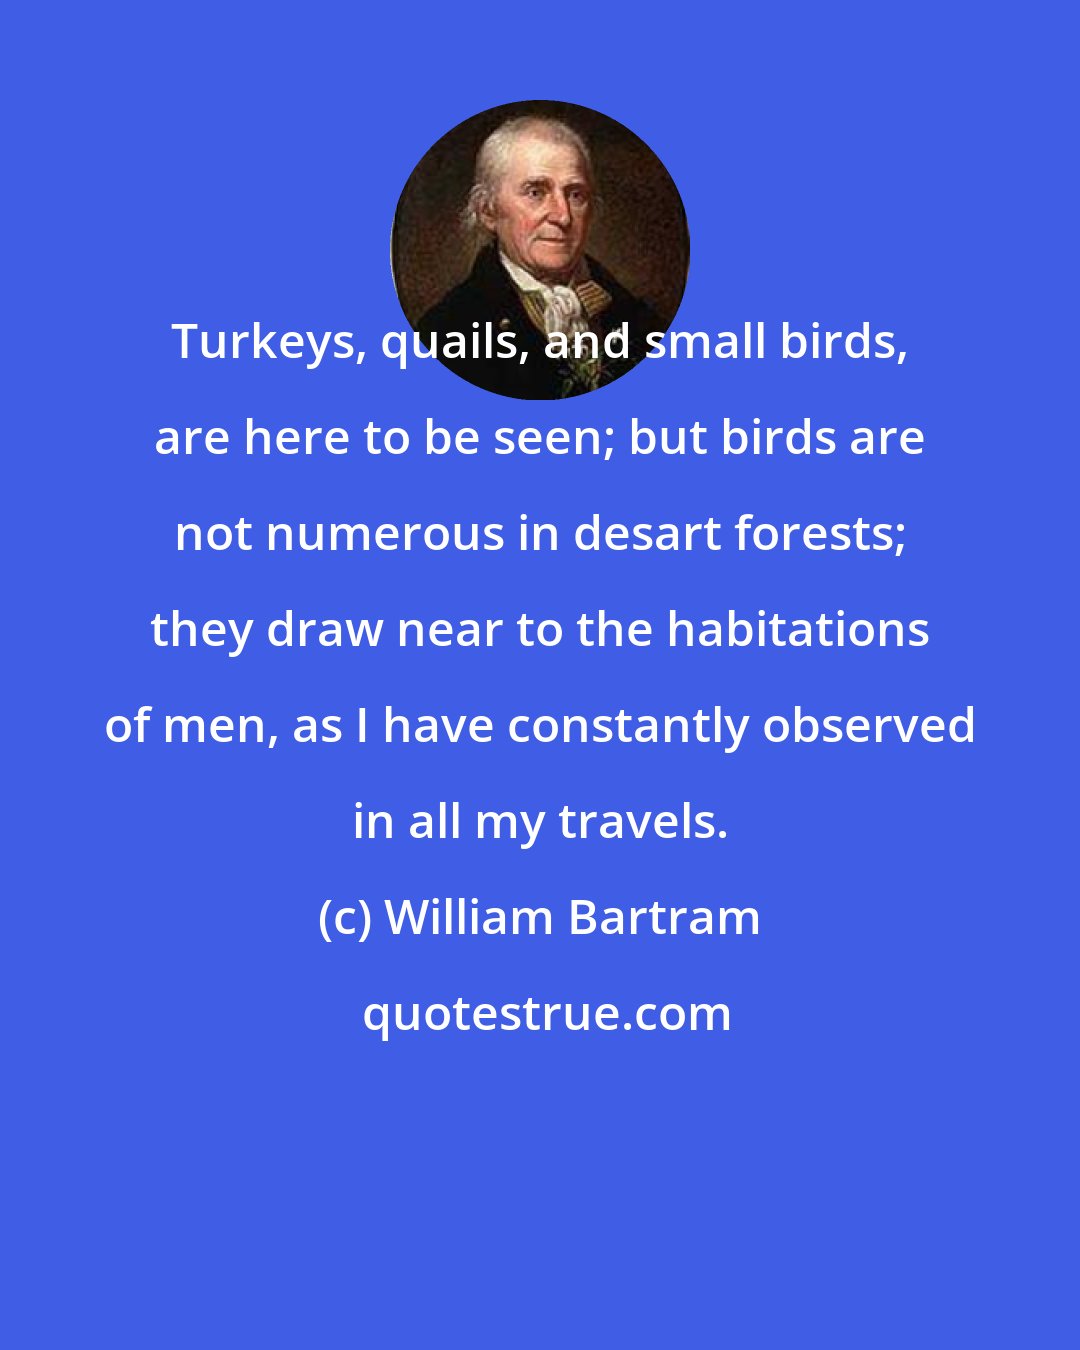 William Bartram: Turkeys, quails, and small birds, are here to be seen; but birds are not numerous in desart forests; they draw near to the habitations of men, as I have constantly observed in all my travels.